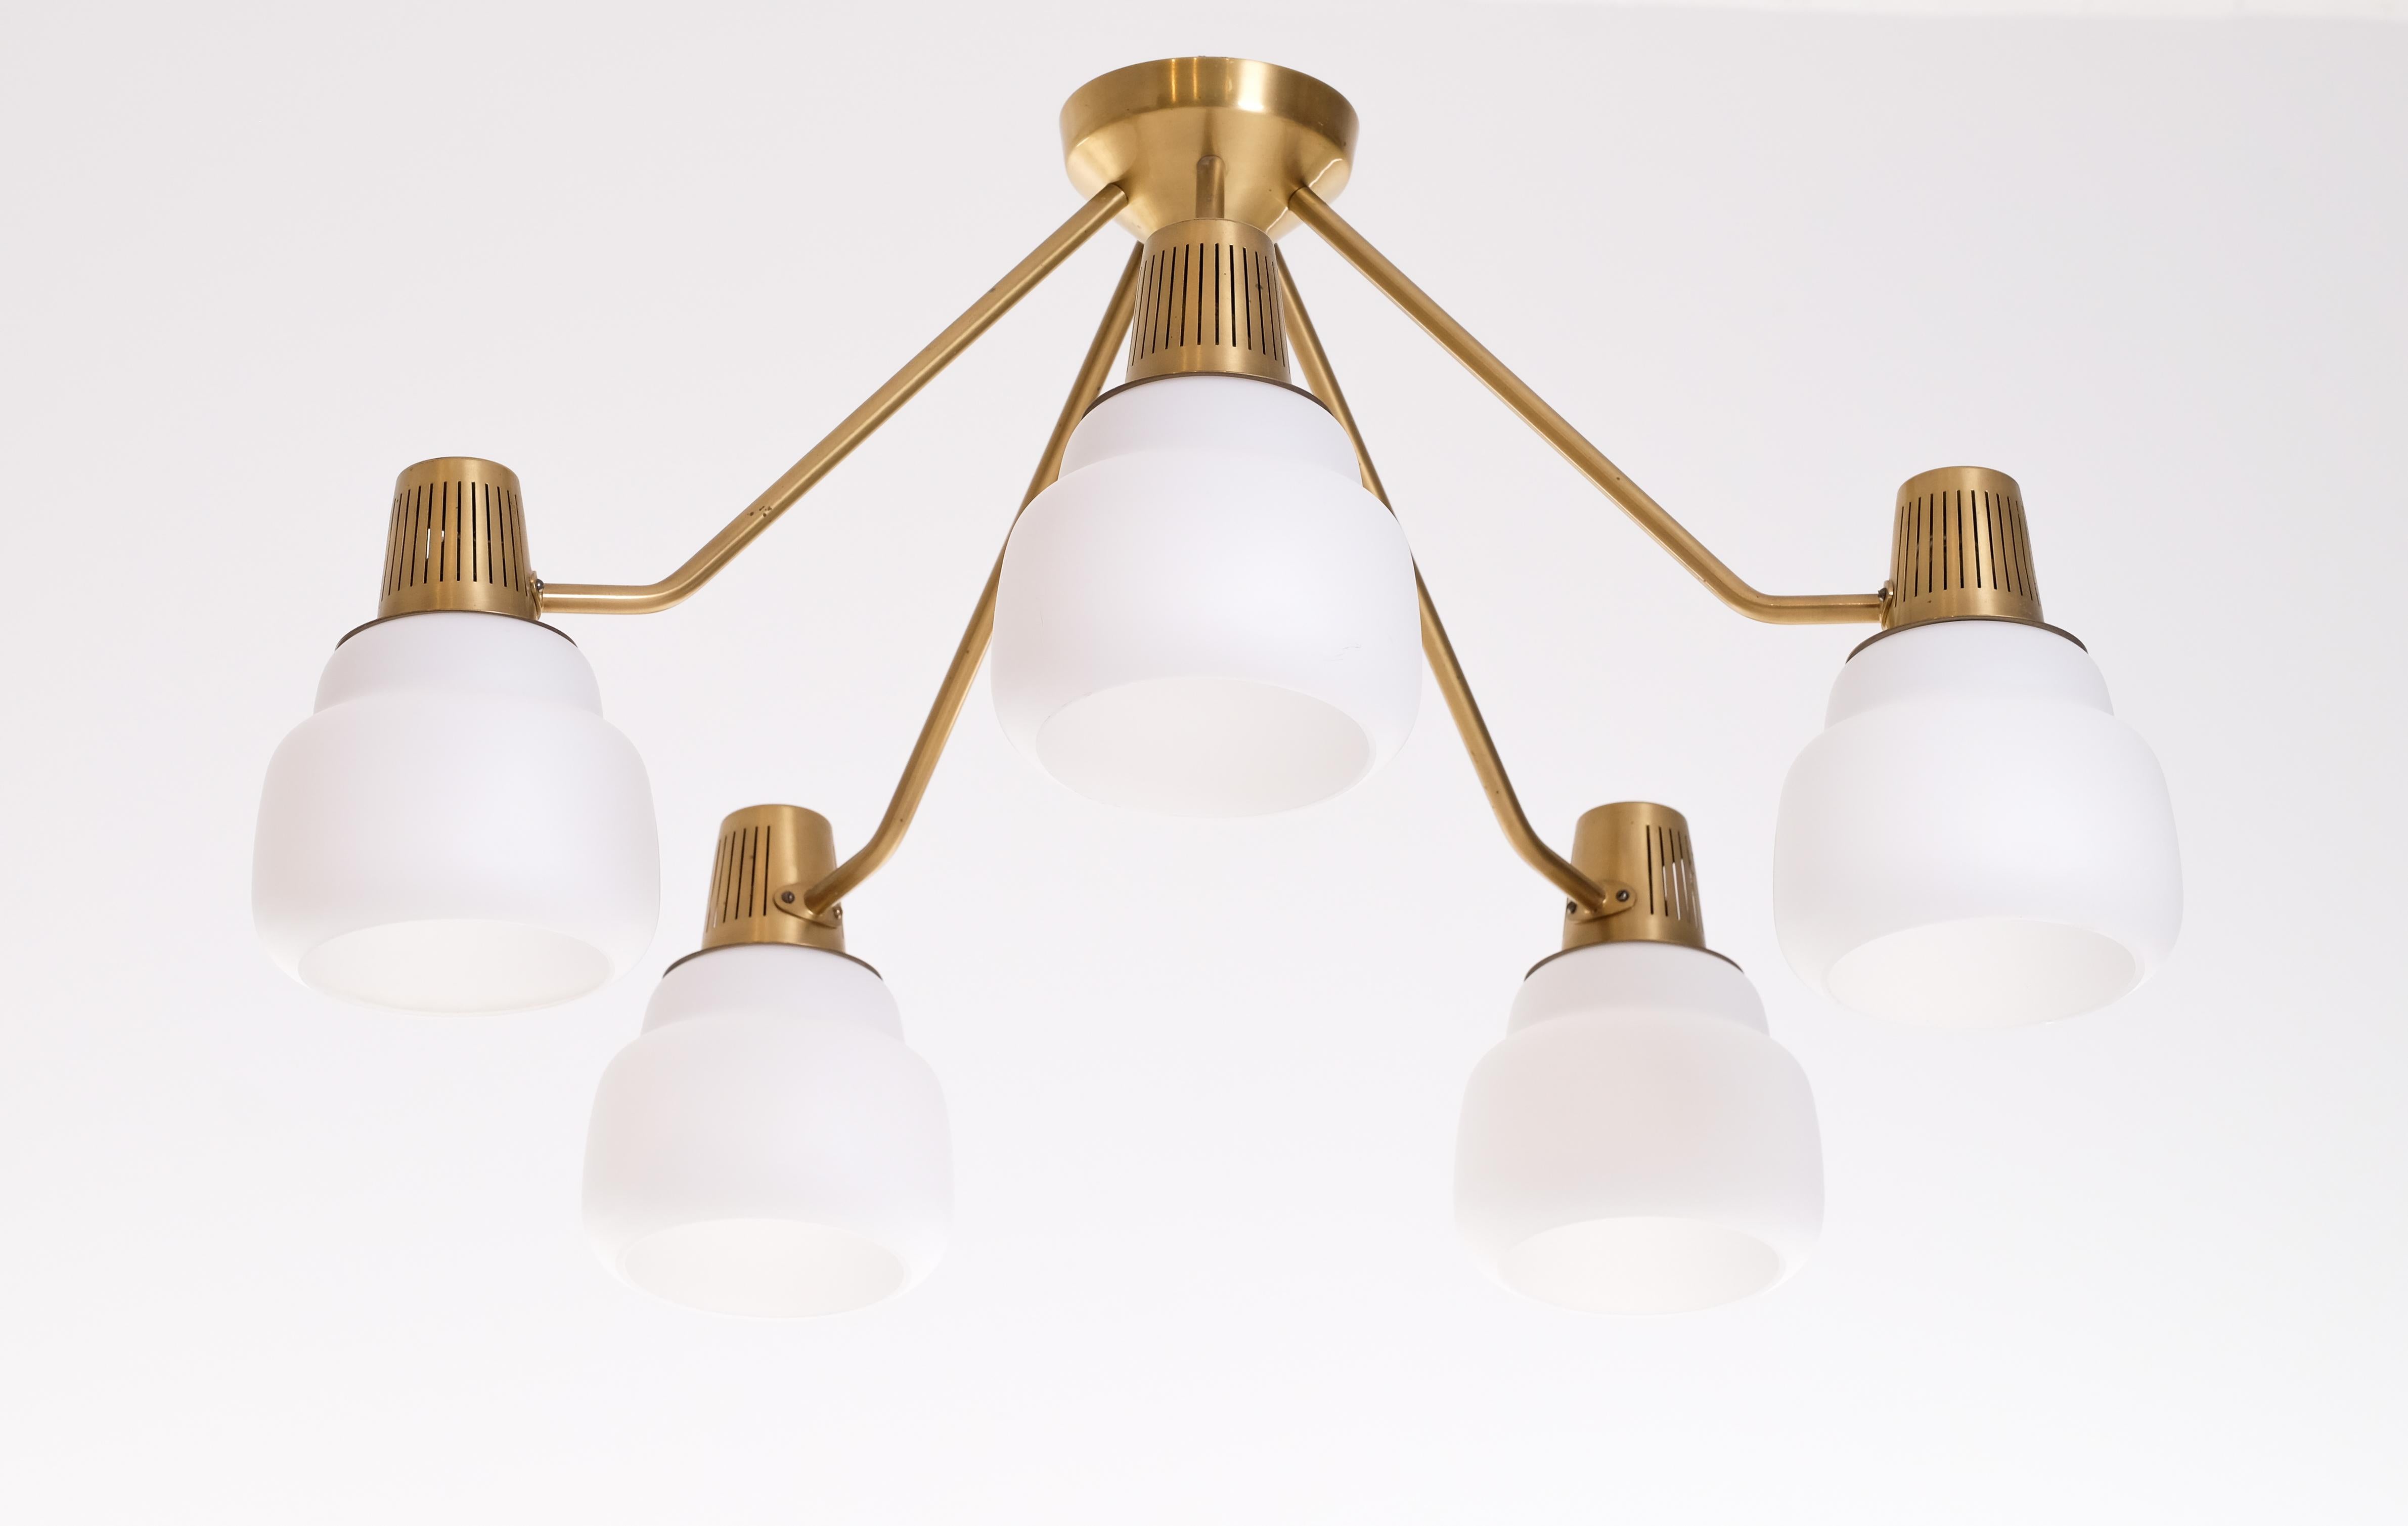 Designed by Hans Bergström. Solid brass and opaline shades.
Produced by Ateljé Lyktan in Åhus, Sweden, 1950s.